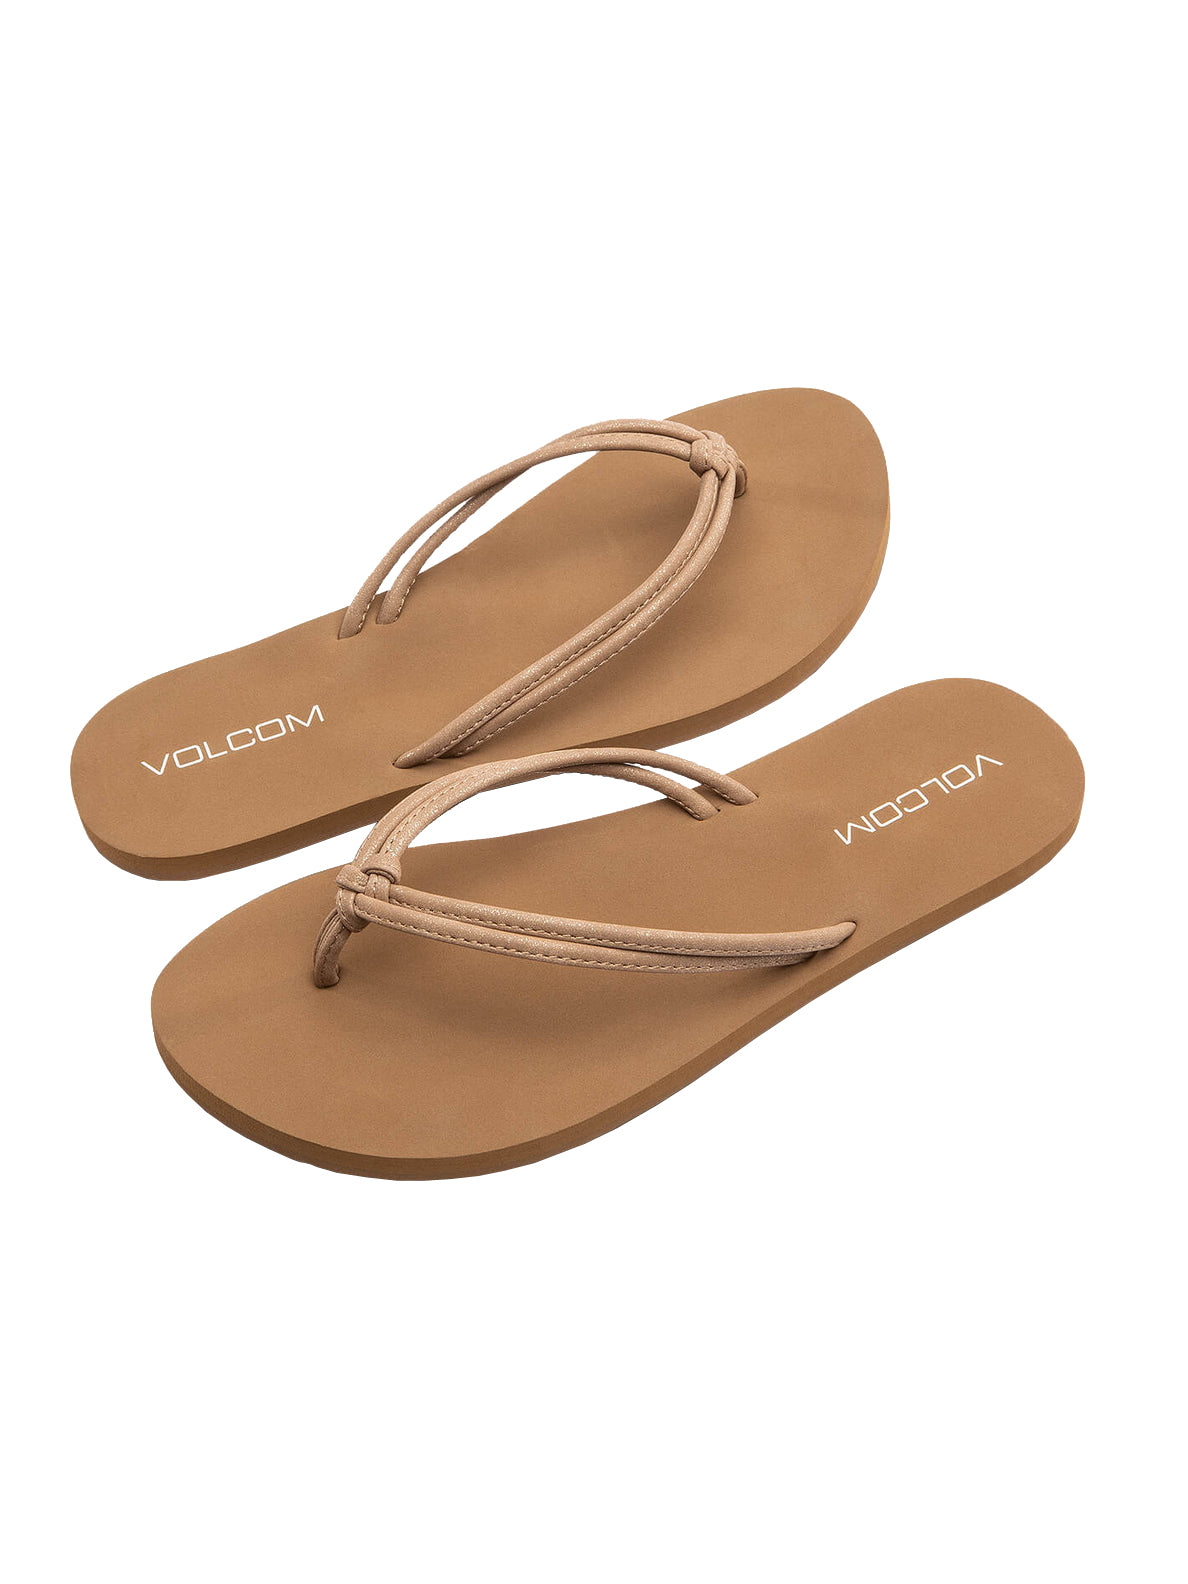 Volcom Forever and Ever 2 Womens Sandal TAN-Tan 7